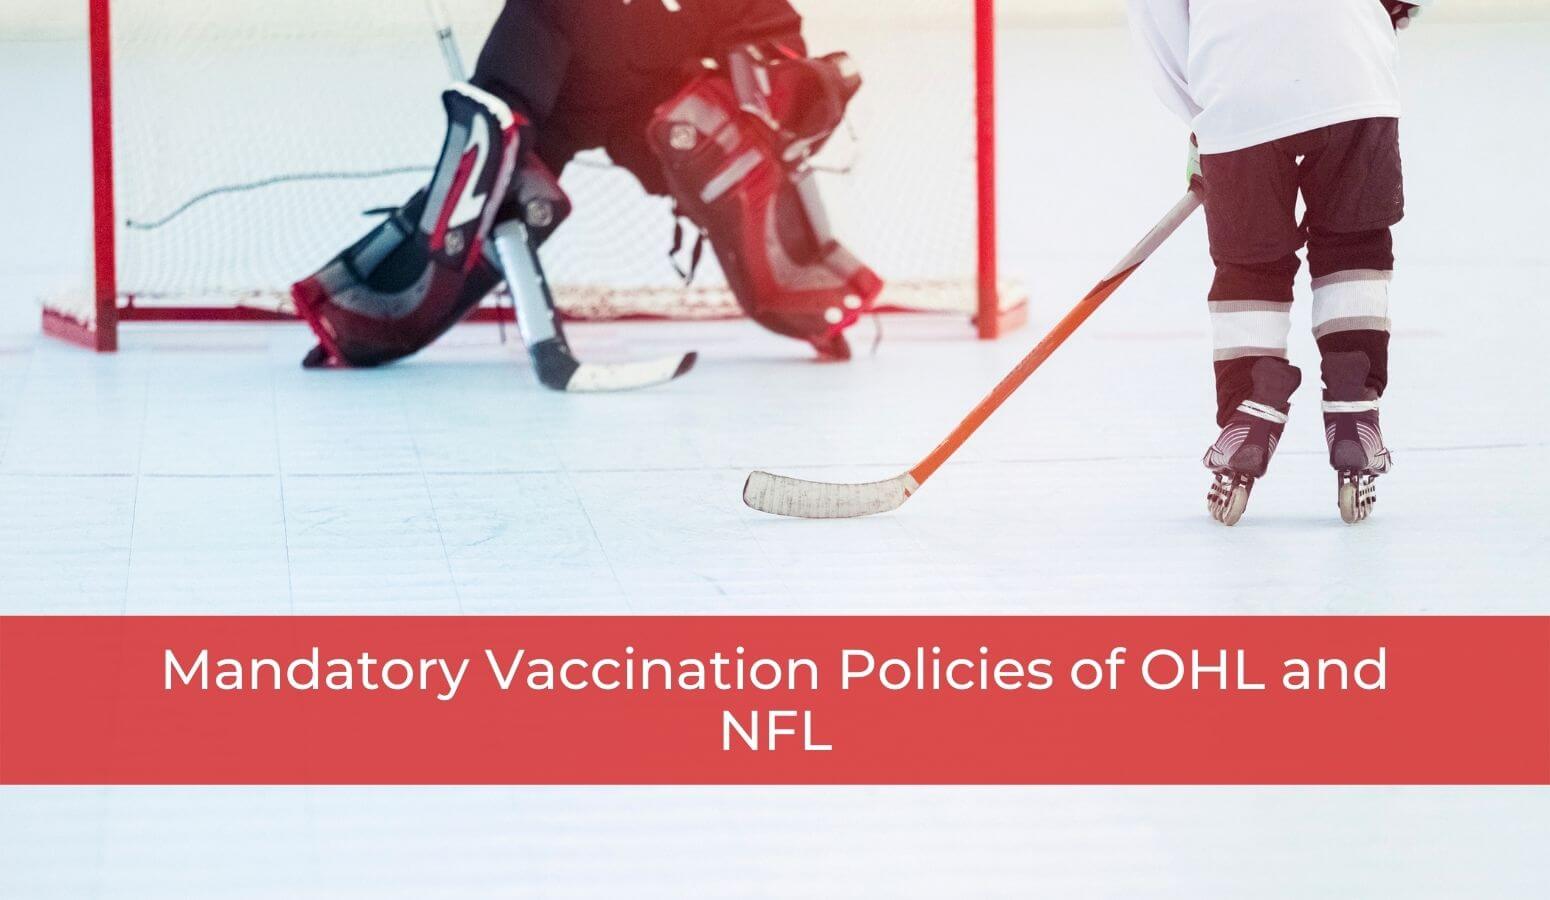 Featured image for “OHL Vaccination Policy – Mandatory Vaccination Policies of OHL and NFL”